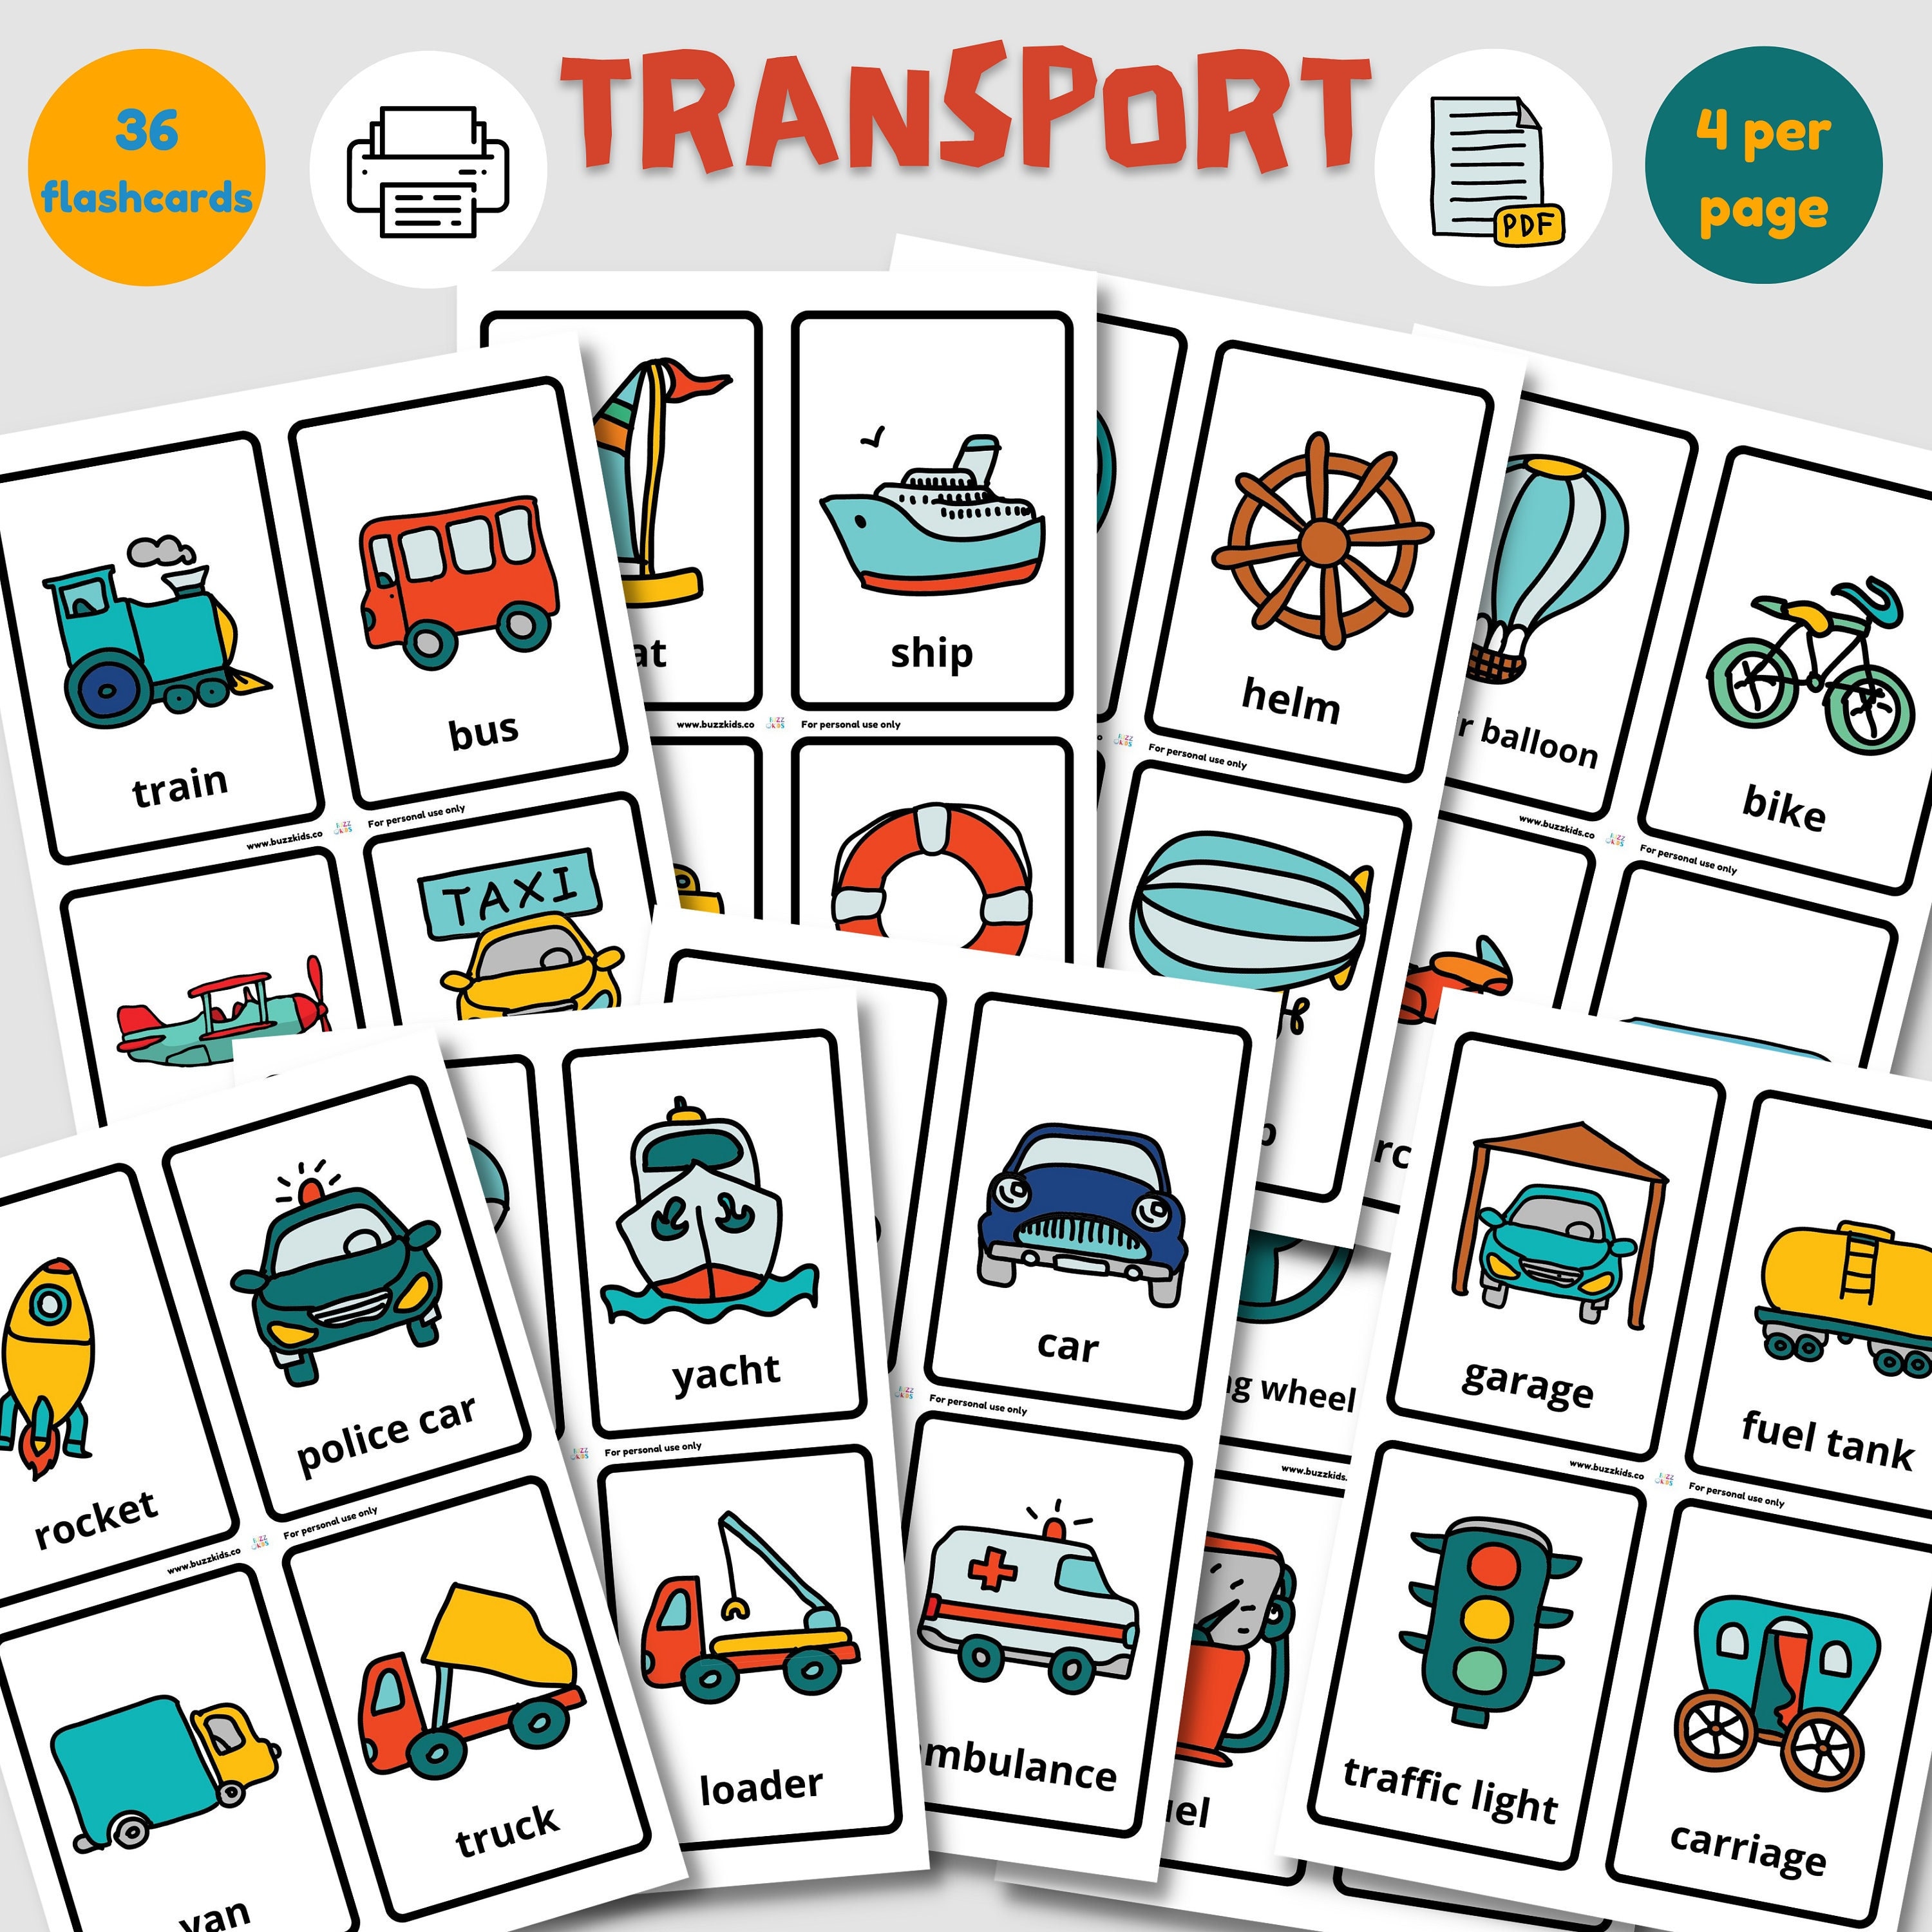 Transportation digital flashcards teaching materials about winter instant downloads transport vocabulary flash cards visual card learning